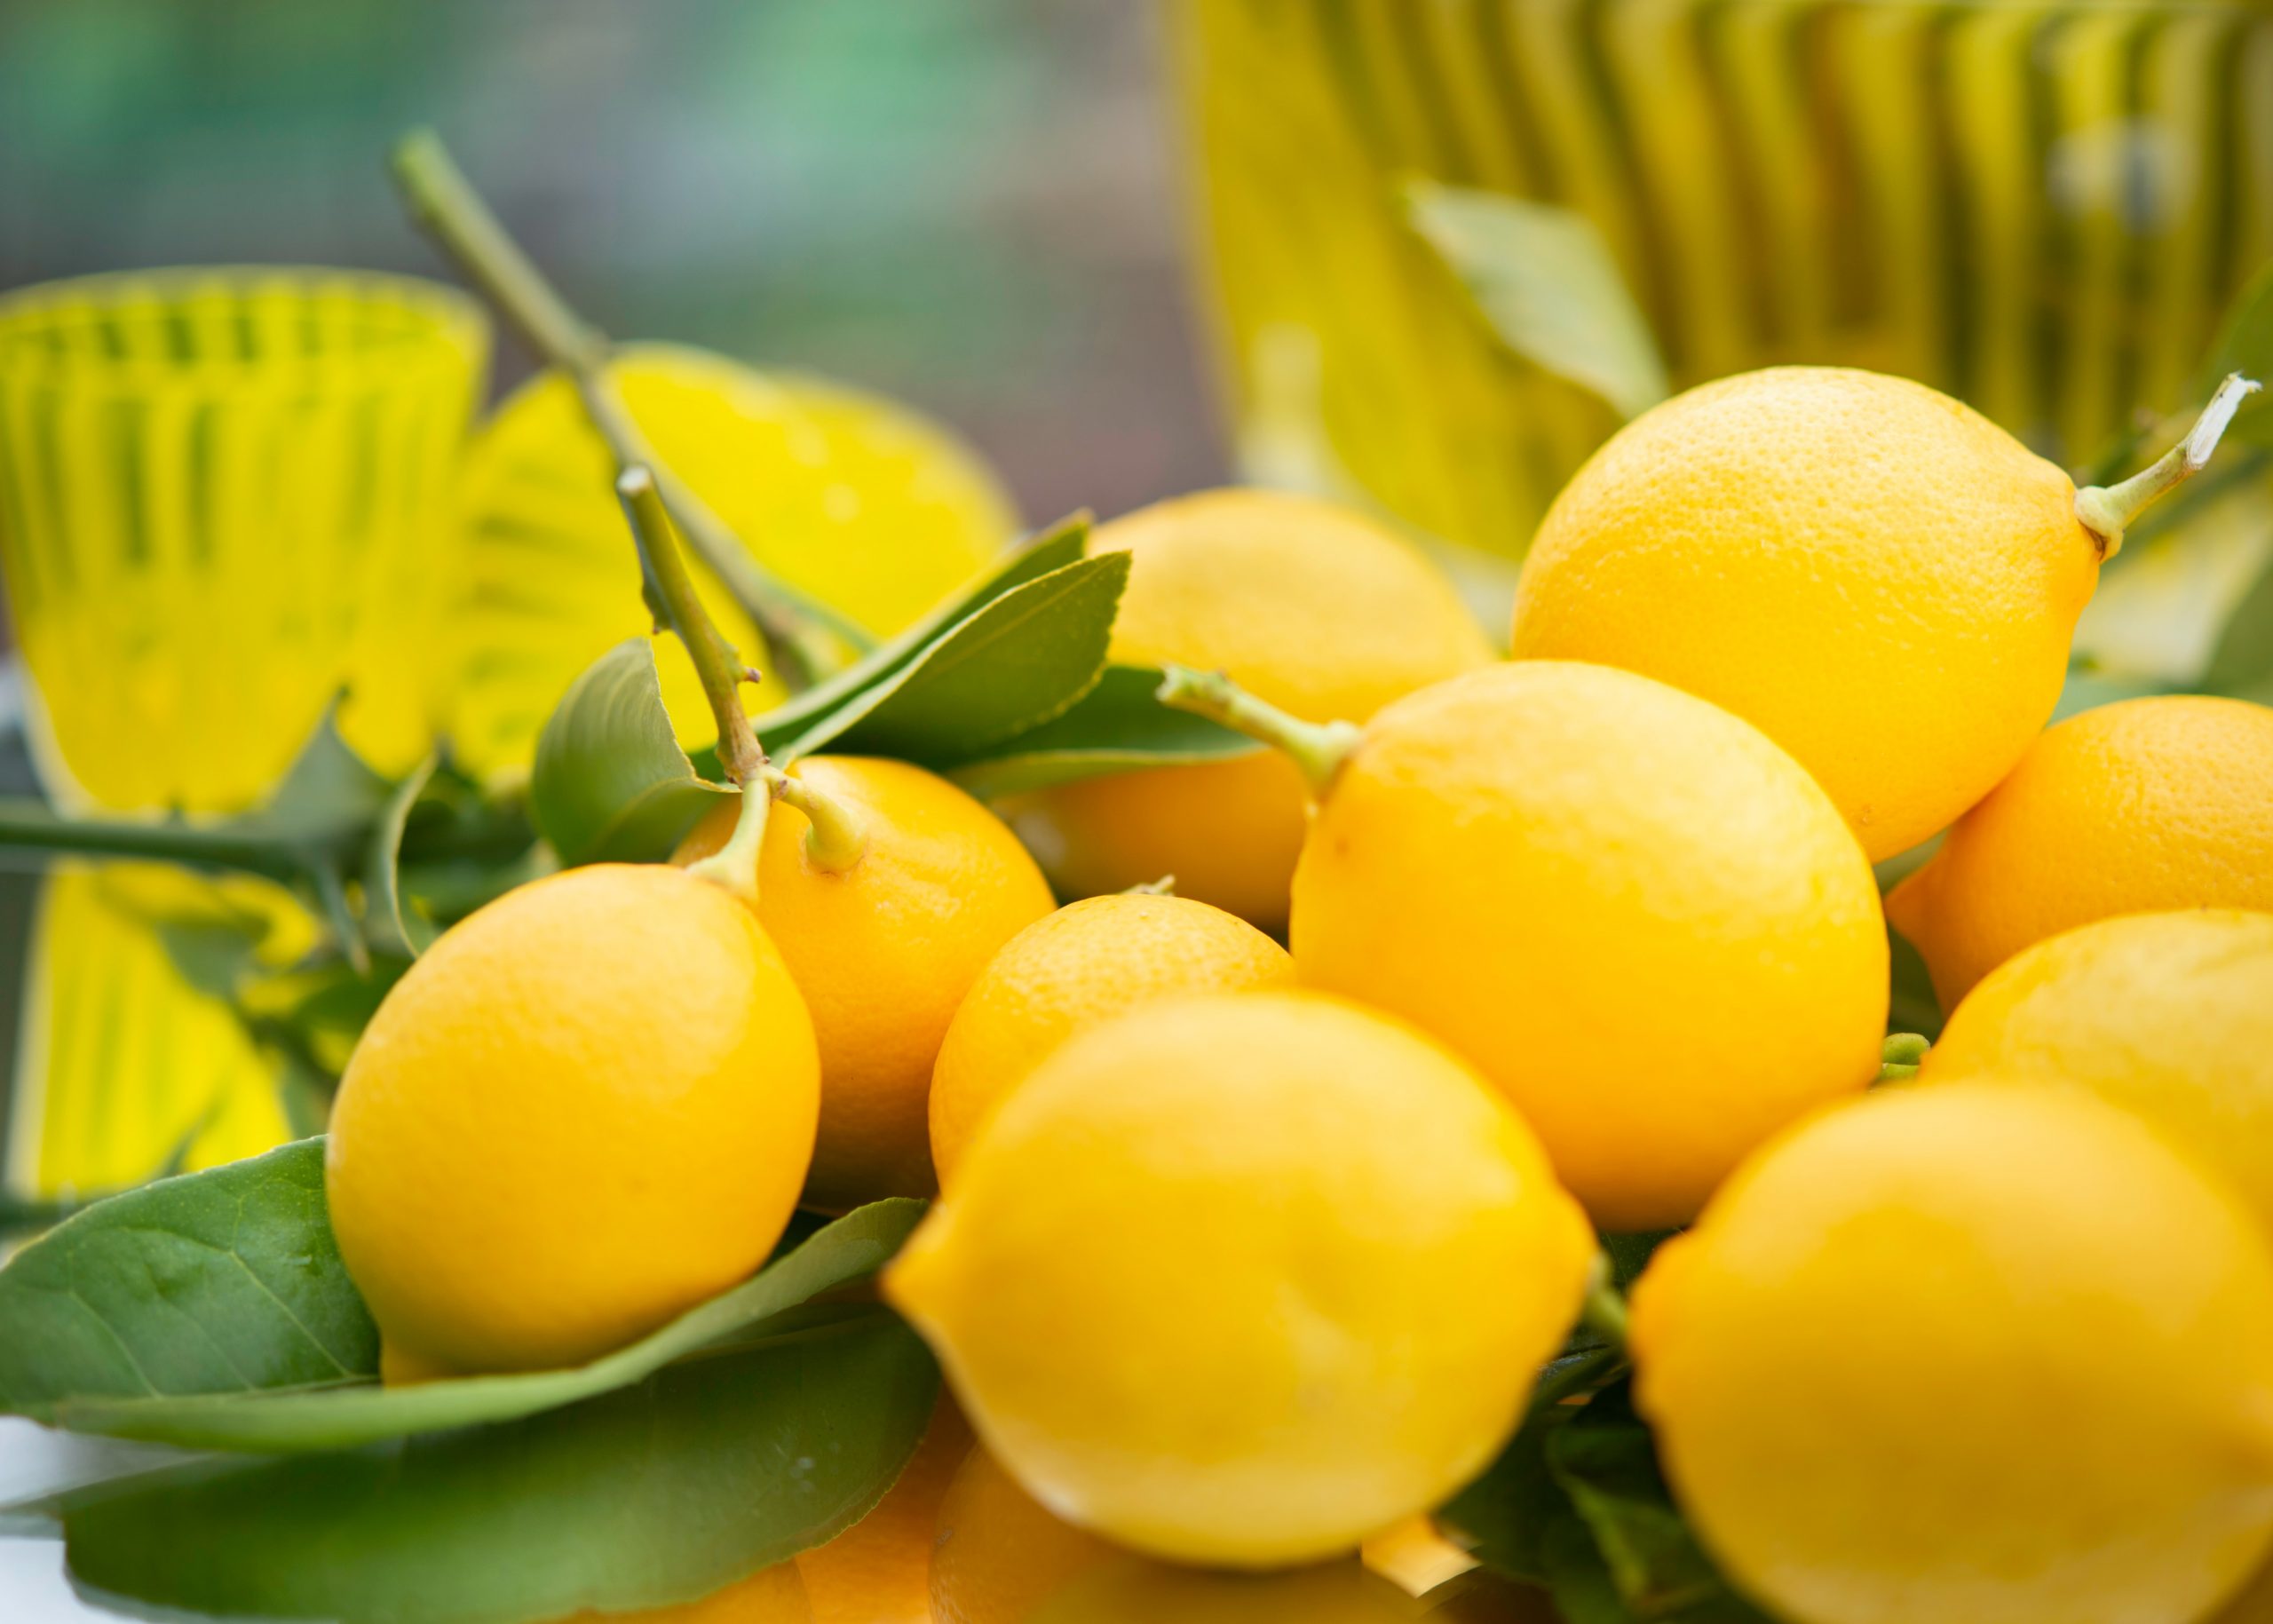 What Is The Lowest Temperature A Meyer Lemon Tree Can Tolerate?